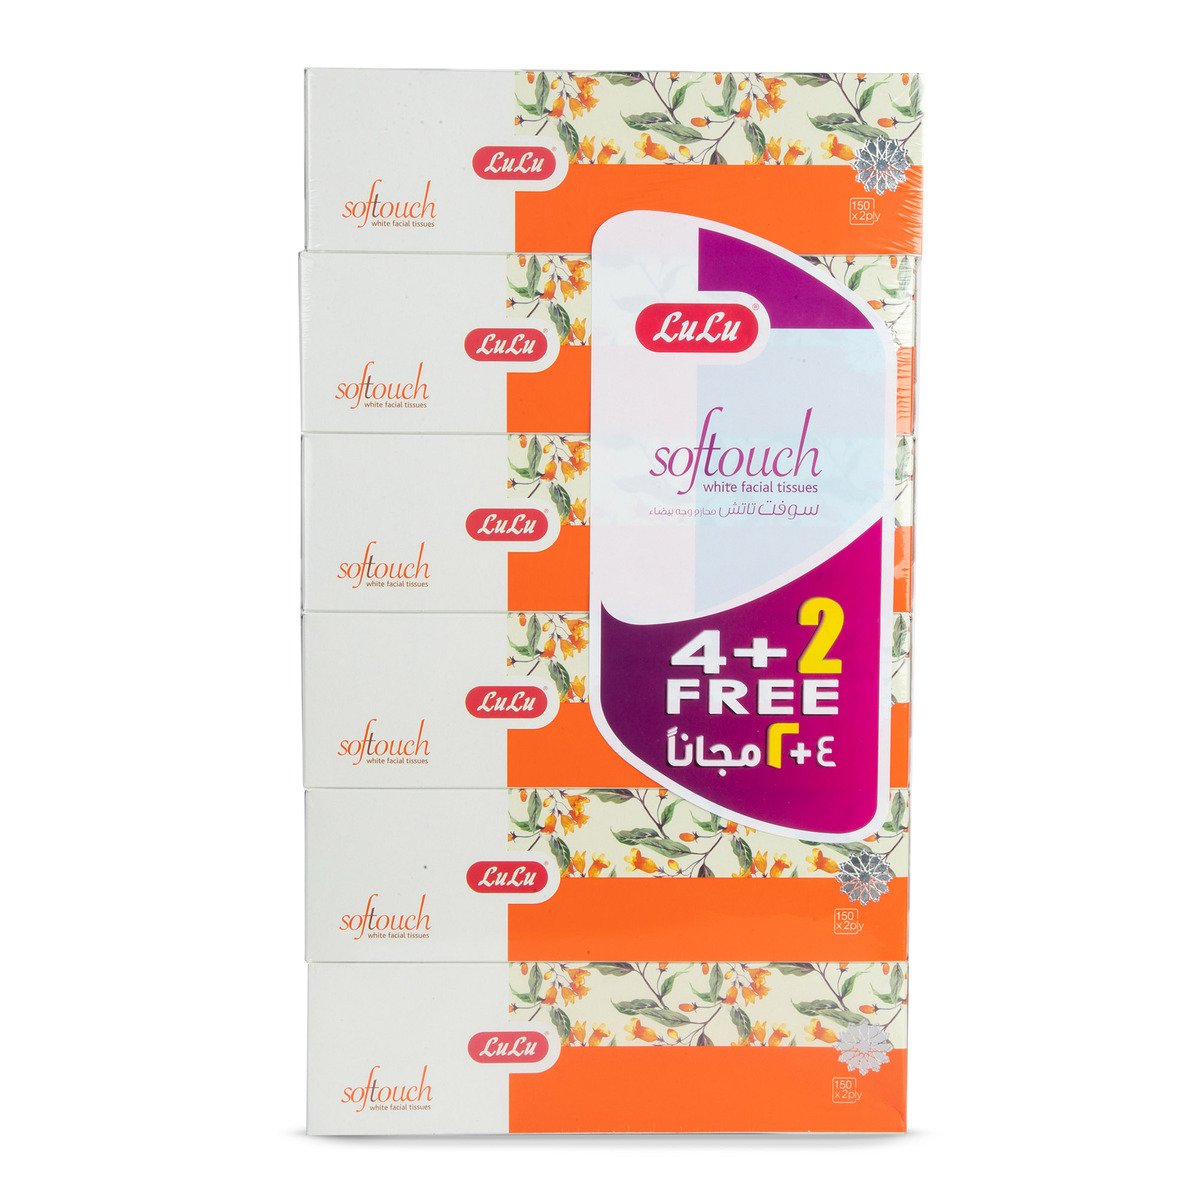 LuLu Softouch Facial Tissue 2ply 150 Sheets 4+2